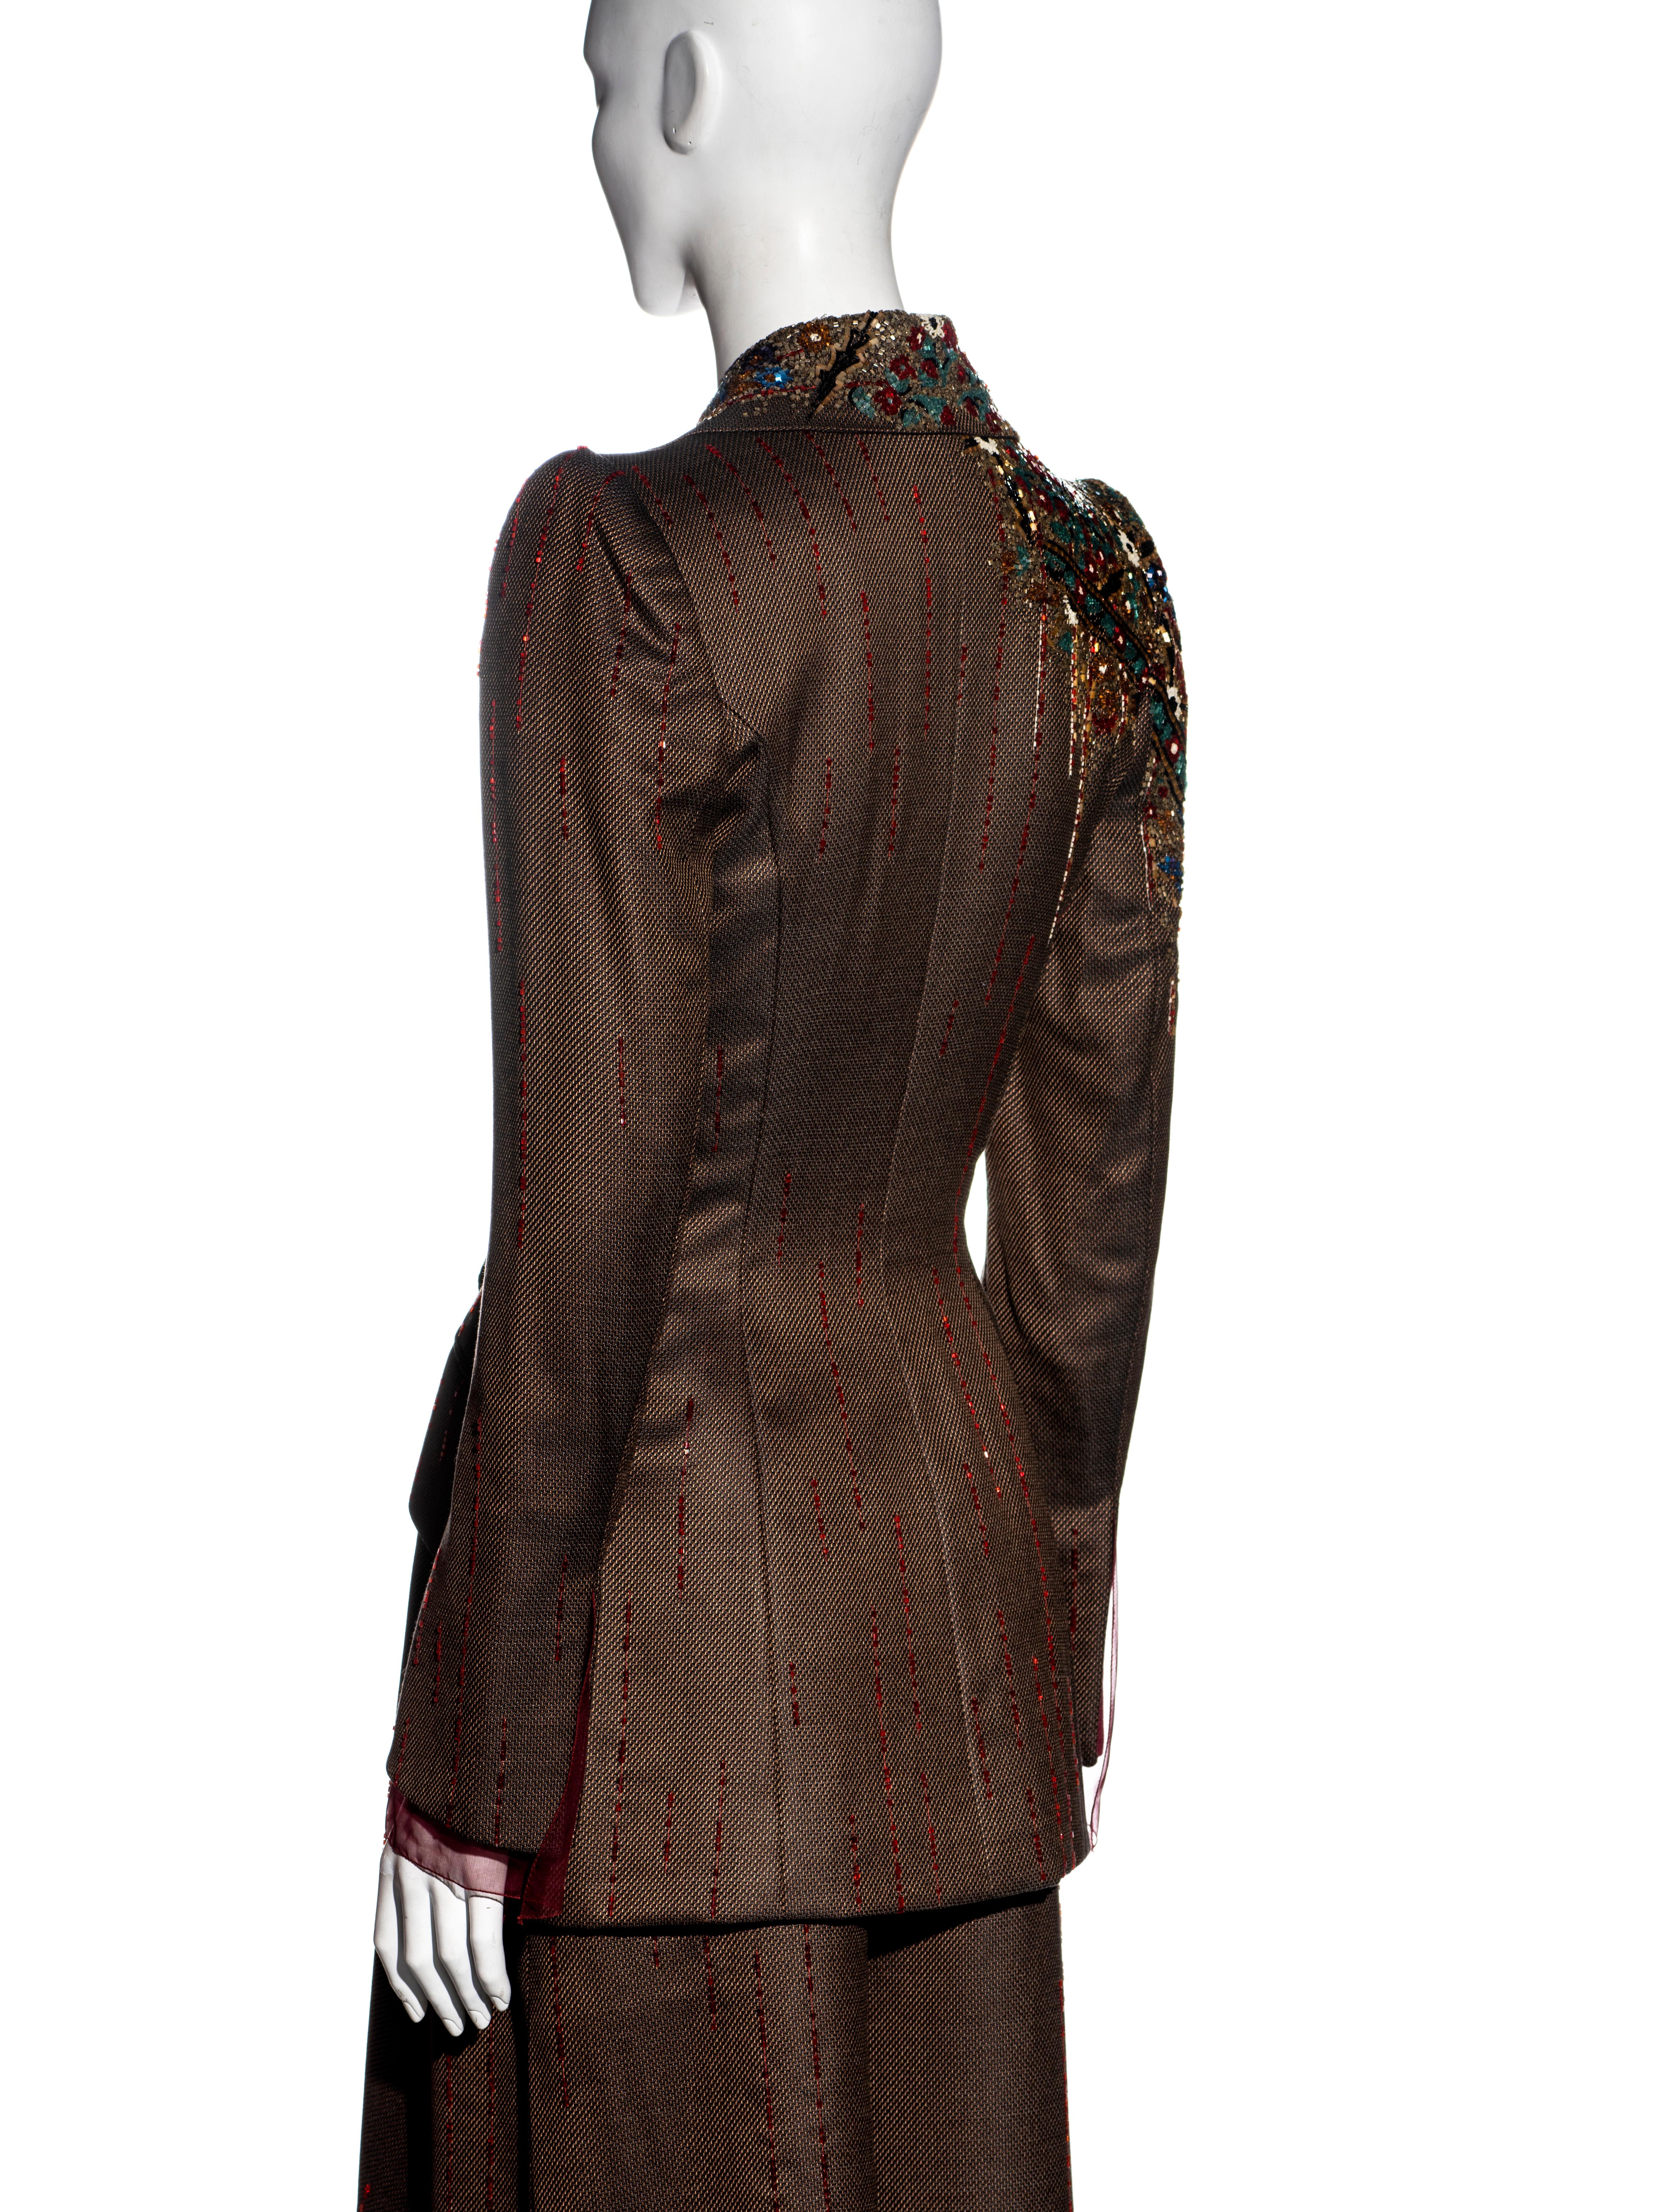 Jean-Louis Scherrer Haute Couture embellished brown wool pant suit, fw 2001 For Sale 8